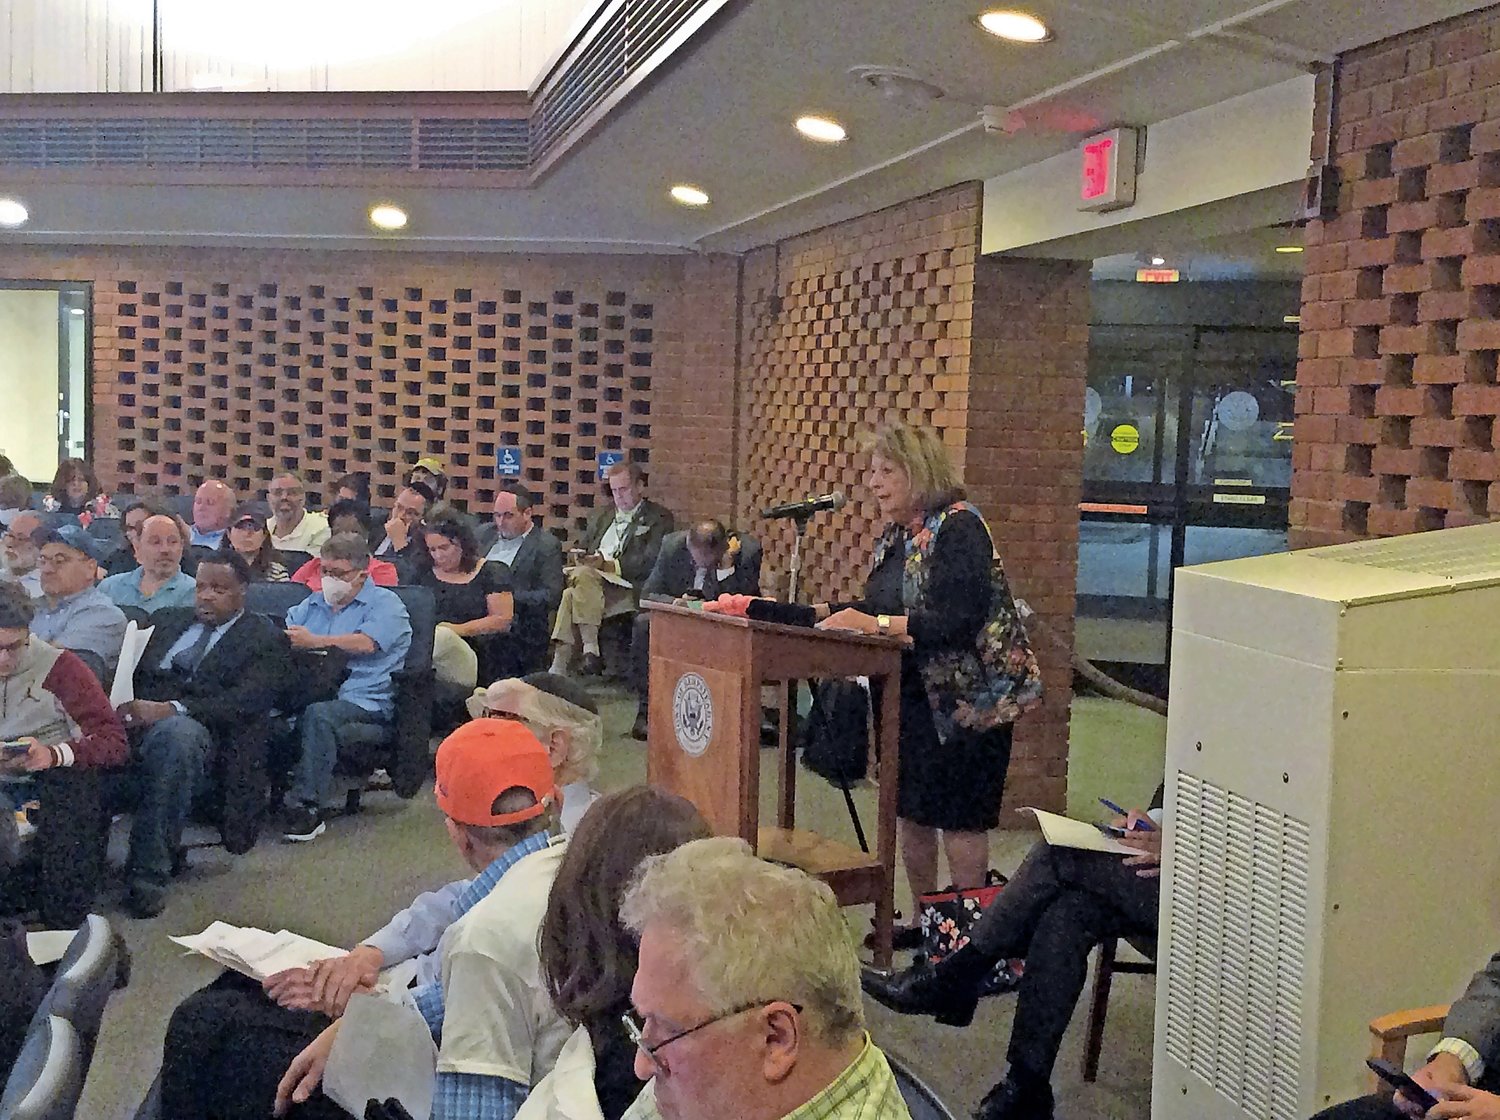 Rochelle Stern Kevelson was among the many Five Towns residents who spoke out in opposition to the potential developments.